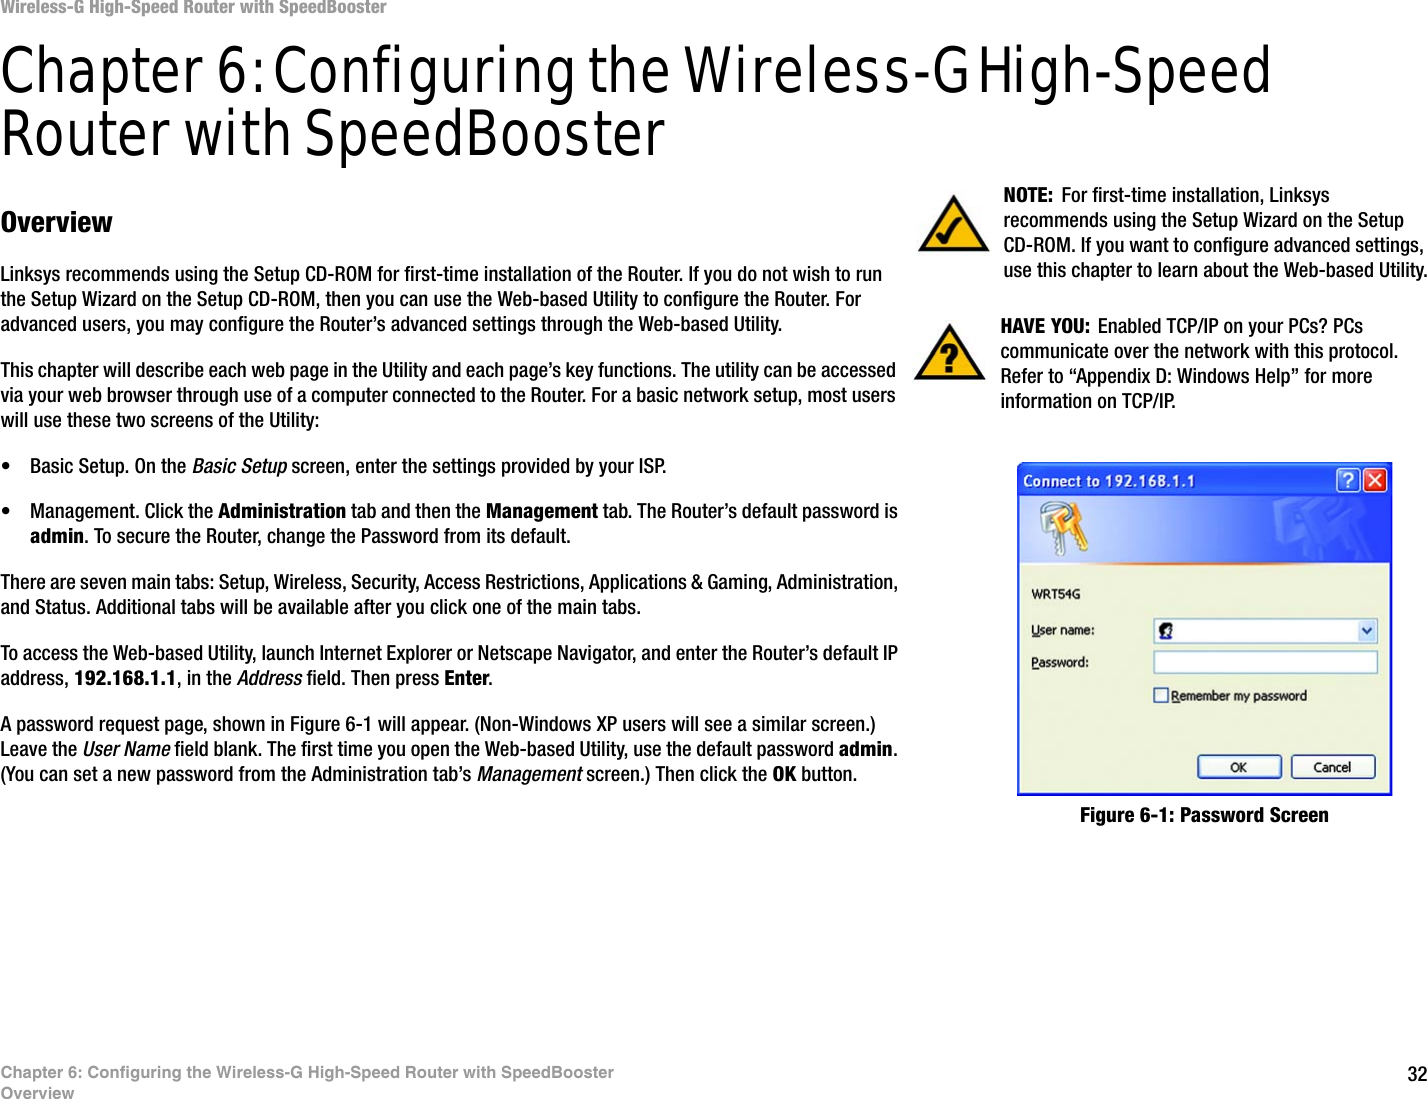 32Chapter 6: Configuring the Wireless-G High-Speed Router with SpeedBoosterOverviewWireless-G High-Speed Router with SpeedBoosterChapter 6: Configuring the Wireless-G High-Speed Router with SpeedBoosterOverviewLinksys recommends using the Setup CD-ROM for first-time installation of the Router. If you do not wish to run the Setup Wizard on the Setup CD-ROM, then you can use the Web-based Utility to configure the Router. For advanced users, you may configure the Router’s advanced settings through the Web-based Utility.This chapter will describe each web page in the Utility and each page’s key functions. The utility can be accessed via your web browser through use of a computer connected to the Router. For a basic network setup, most users will use these two screens of the Utility:• Basic Setup. On the Basic Setup screen, enter the settings provided by your ISP.• Management. Click the Administration tab and then the Management tab. The Router’s default password is admin. To secure the Router, change the Password from its default.There are seven main tabs: Setup, Wireless, Security, Access Restrictions, Applications &amp; Gaming, Administration, and Status. Additional tabs will be available after you click one of the main tabs.To access the Web-based Utility, launch Internet Explorer or Netscape Navigator, and enter the Router’s default IP address, 192.168.1.1, in the Address field. Then press Enter. A password request page, shown in Figure 6-1 will appear. (Non-Windows XP users will see a similar screen.) Leave the User Name field blank. The first time you open the Web-based Utility, use the default password admin. (You can set a new password from the Administration tab’s Management screen.) Then click the OK button. HAVE YOU: Enabled TCP/IP on your PCs? PCs communicate over the network with this protocol. Refer to “Appendix D: Windows Help” for more information on TCP/IP.NOTE: For first-time installation, Linksys recommends using the Setup Wizard on the Setup CD-ROM. If you want to configure advanced settings, use this chapter to learn about the Web-based Utility.Figure 6-1: Password Screen